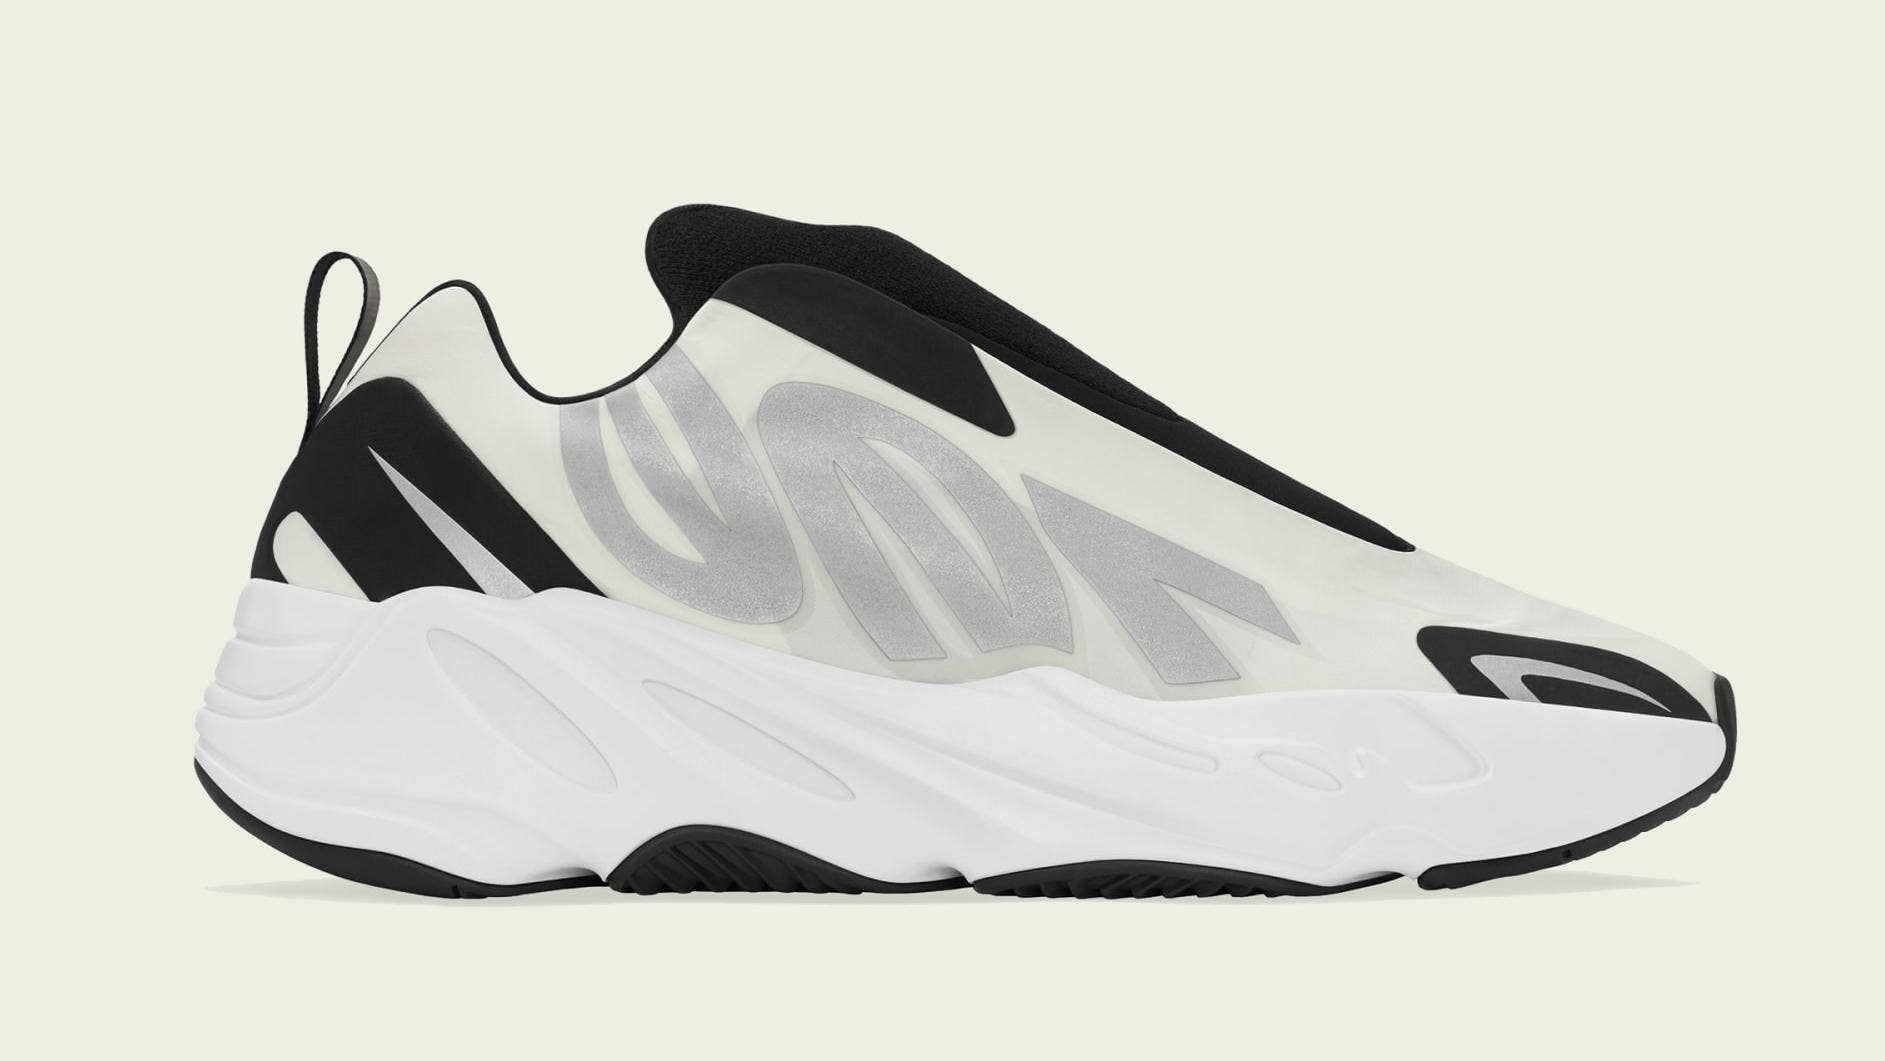 Adidas Yeezy Boost 700 MNVN Laceless 'Analog' IG4798 Lateral